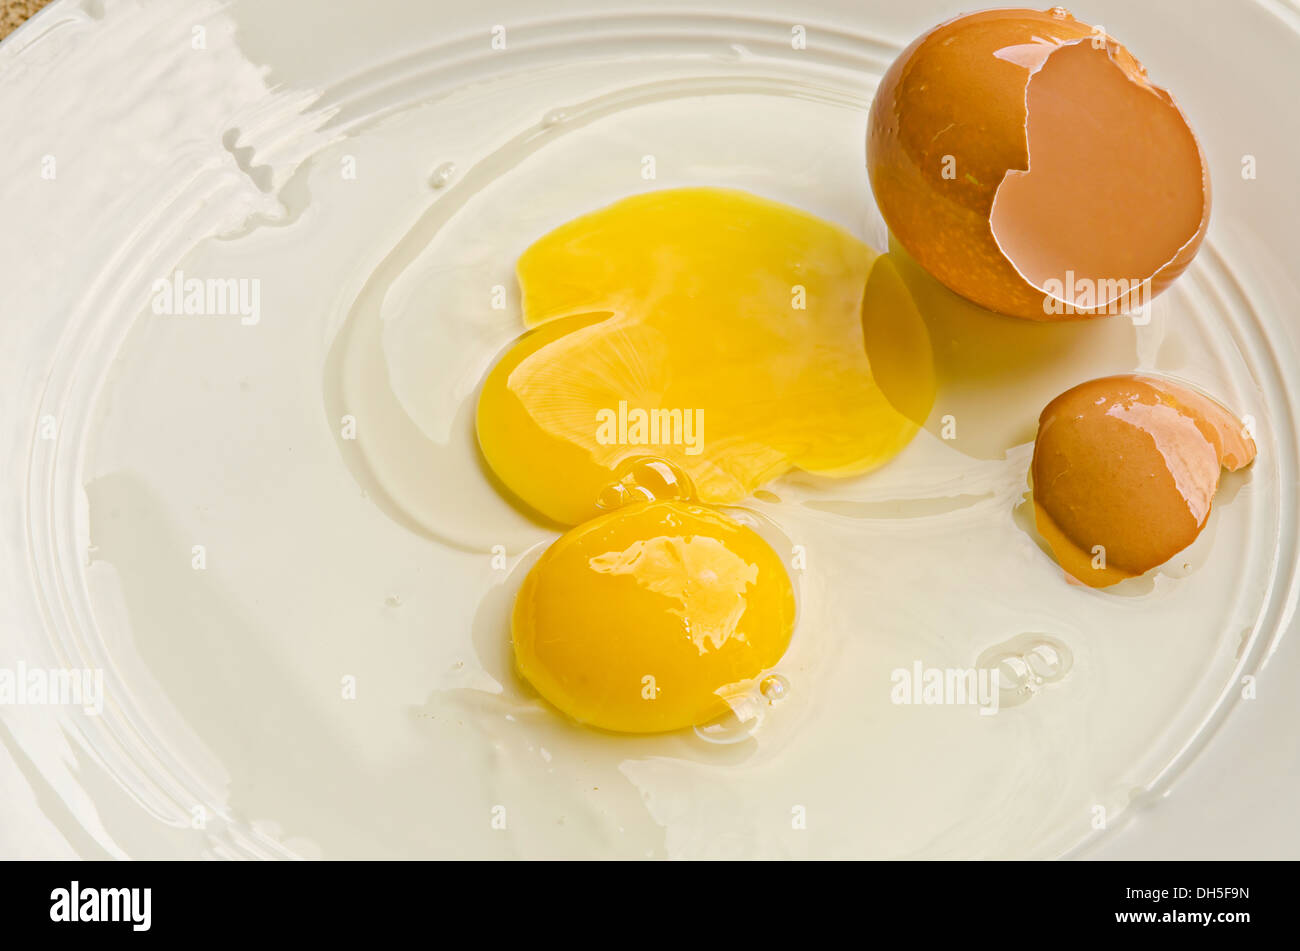 Raw egg yolk and egg white with the cracked open egg shell Stock Photo